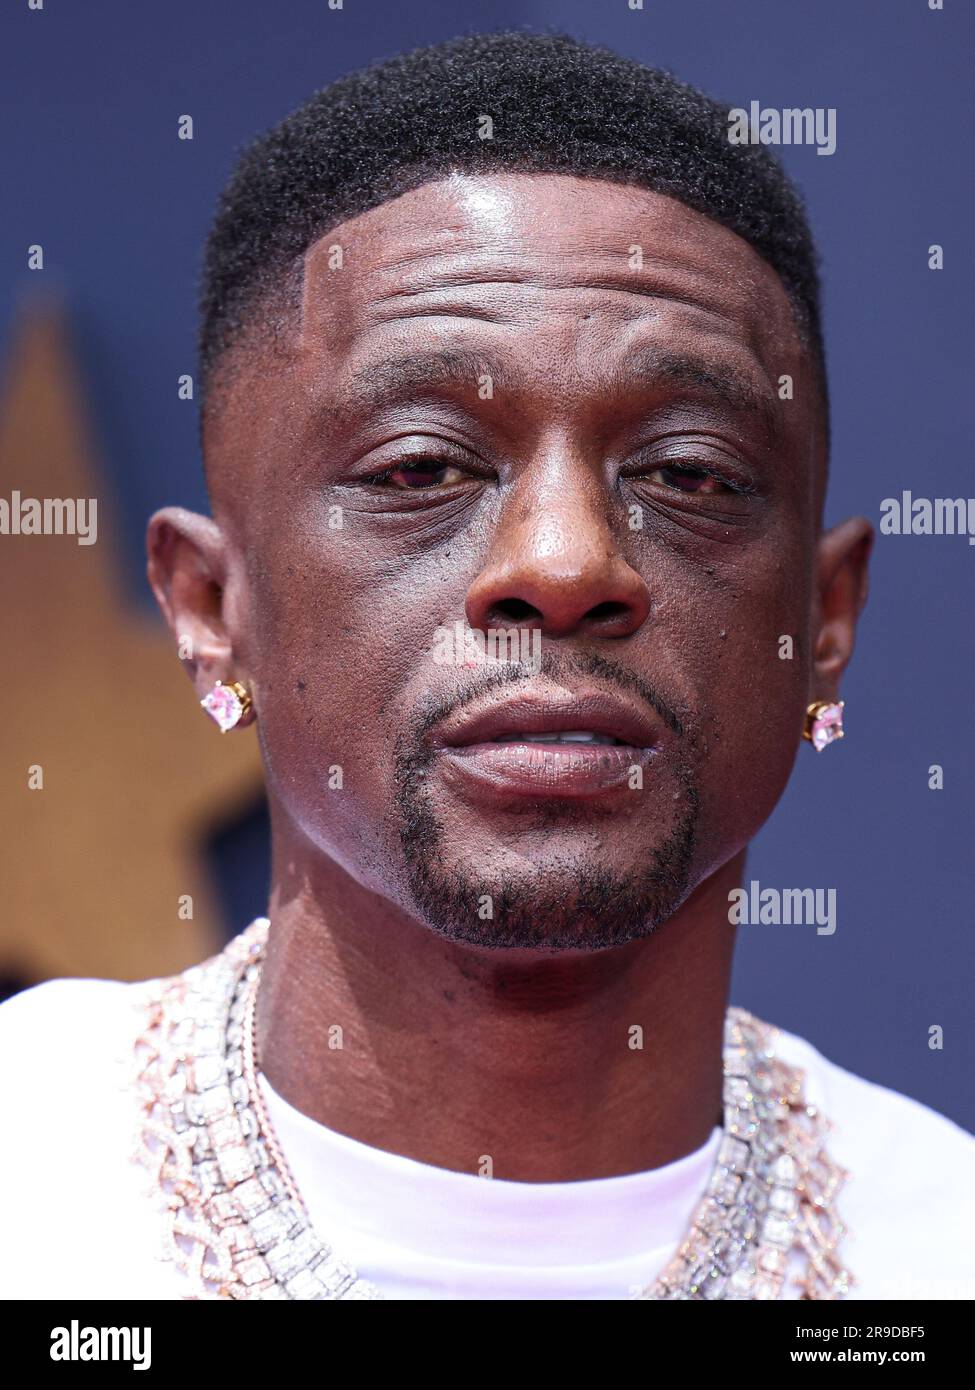 Guest Boosie Badazz - Image 1 from BET Awards 2023 - Red Carpet